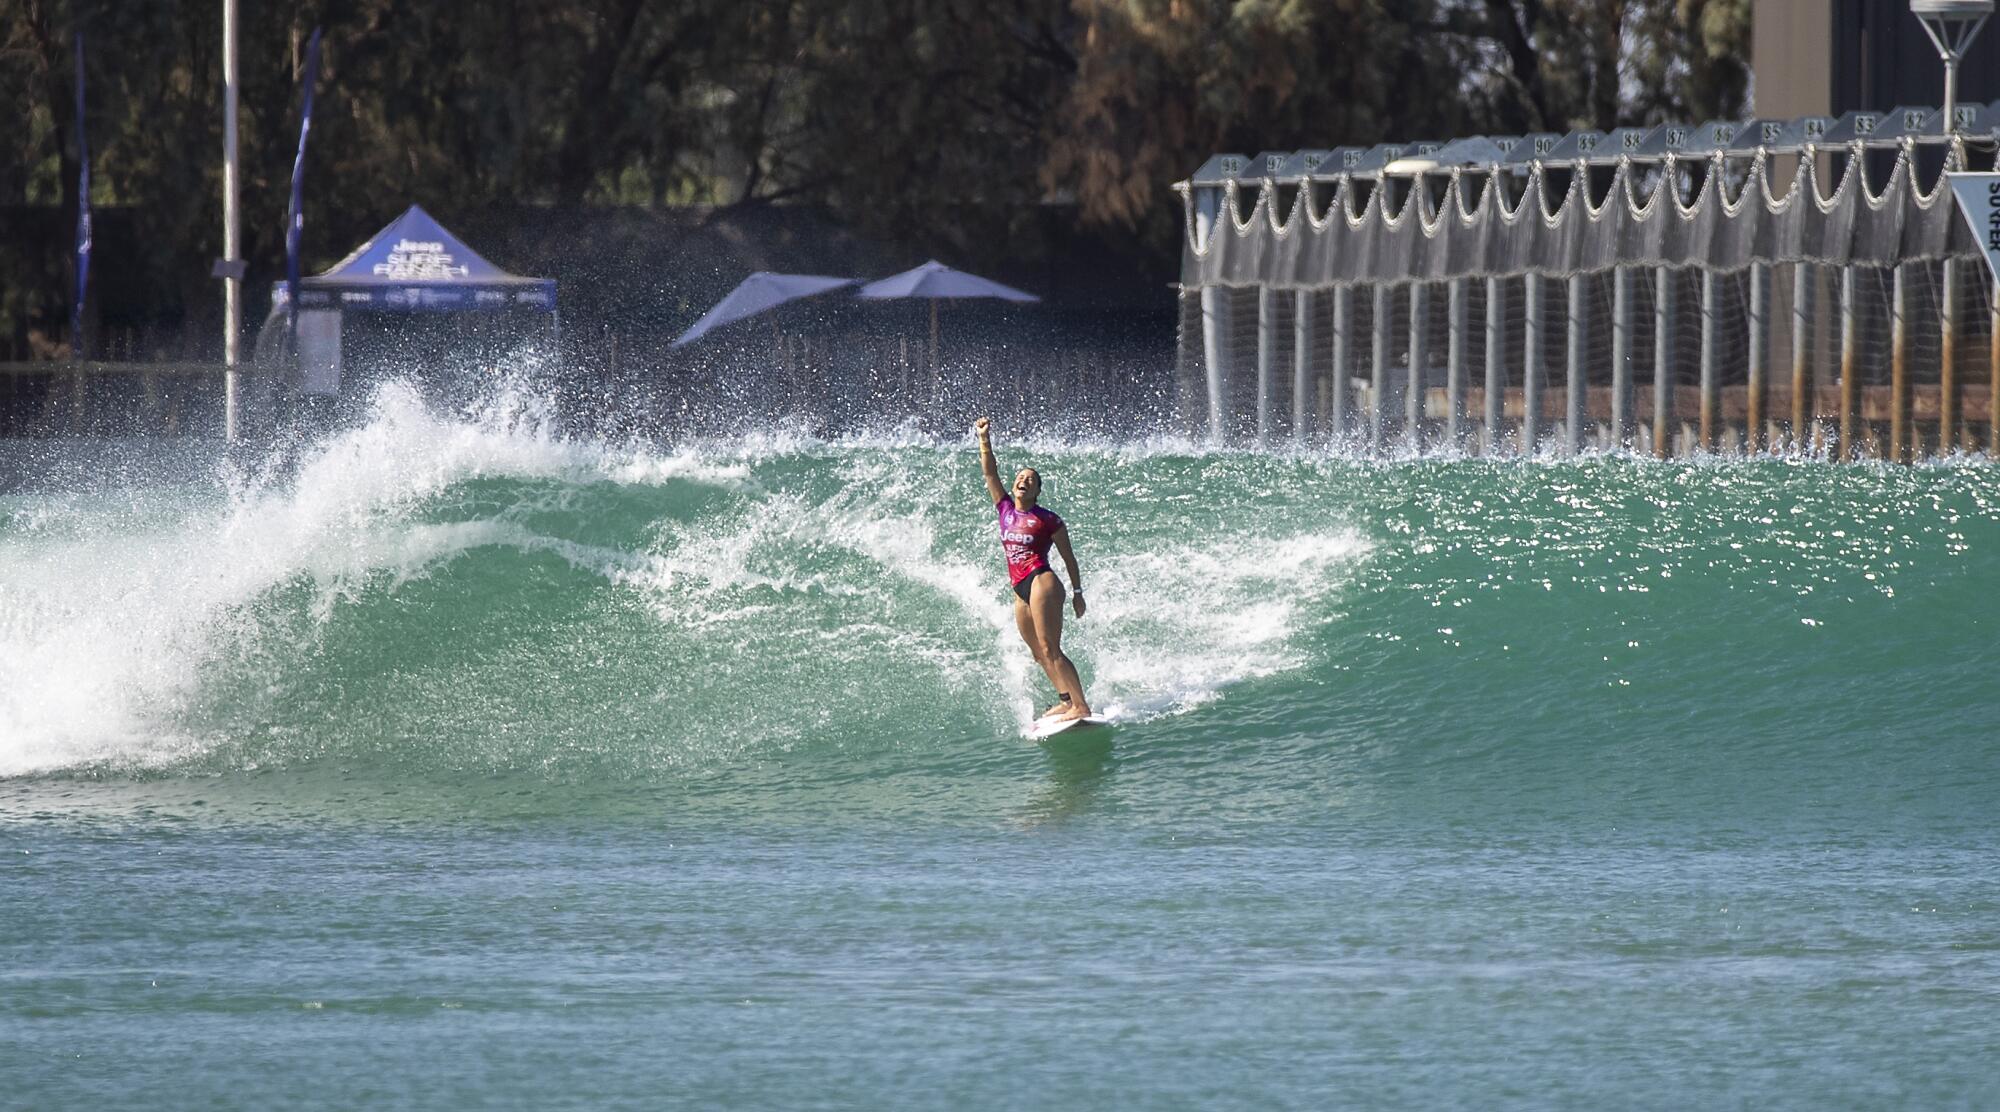 Johanne Defay raises her arm in victory while riding a wave